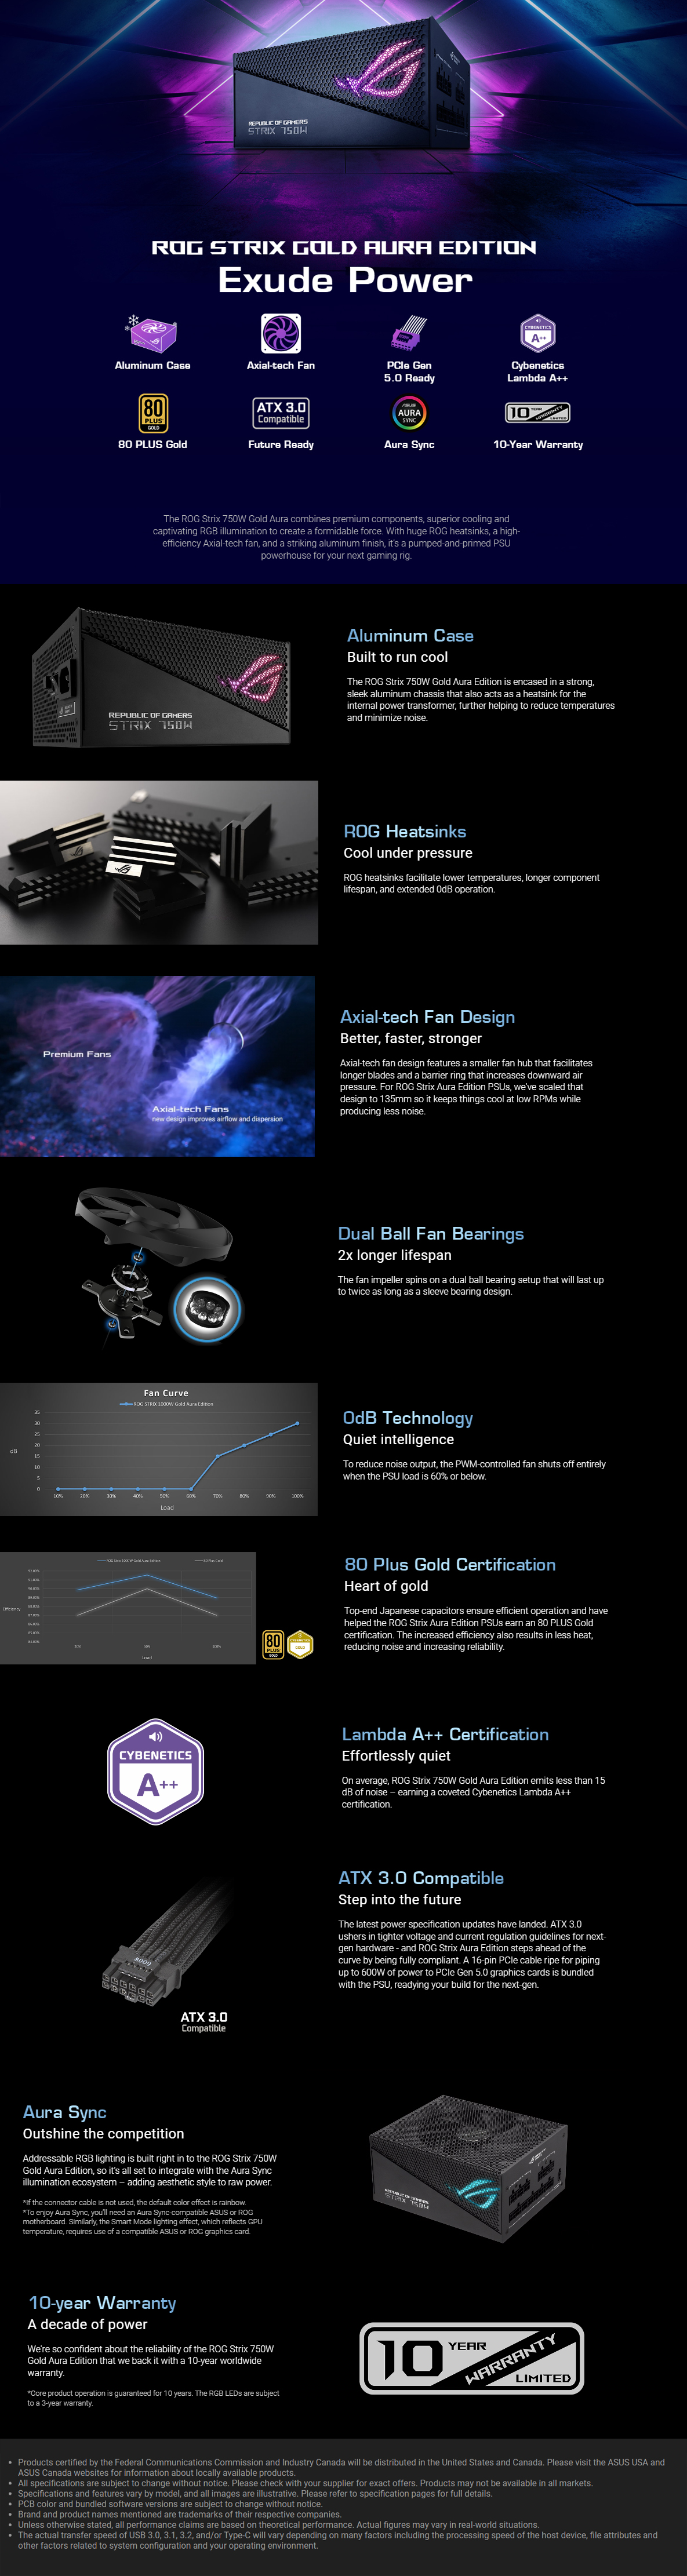 A large marketing image providing additional information about the product ASUS ROG Strix Aura Edition 850W Gold PCIe 5.0 ATX Modular PSU - Additional alt info not provided